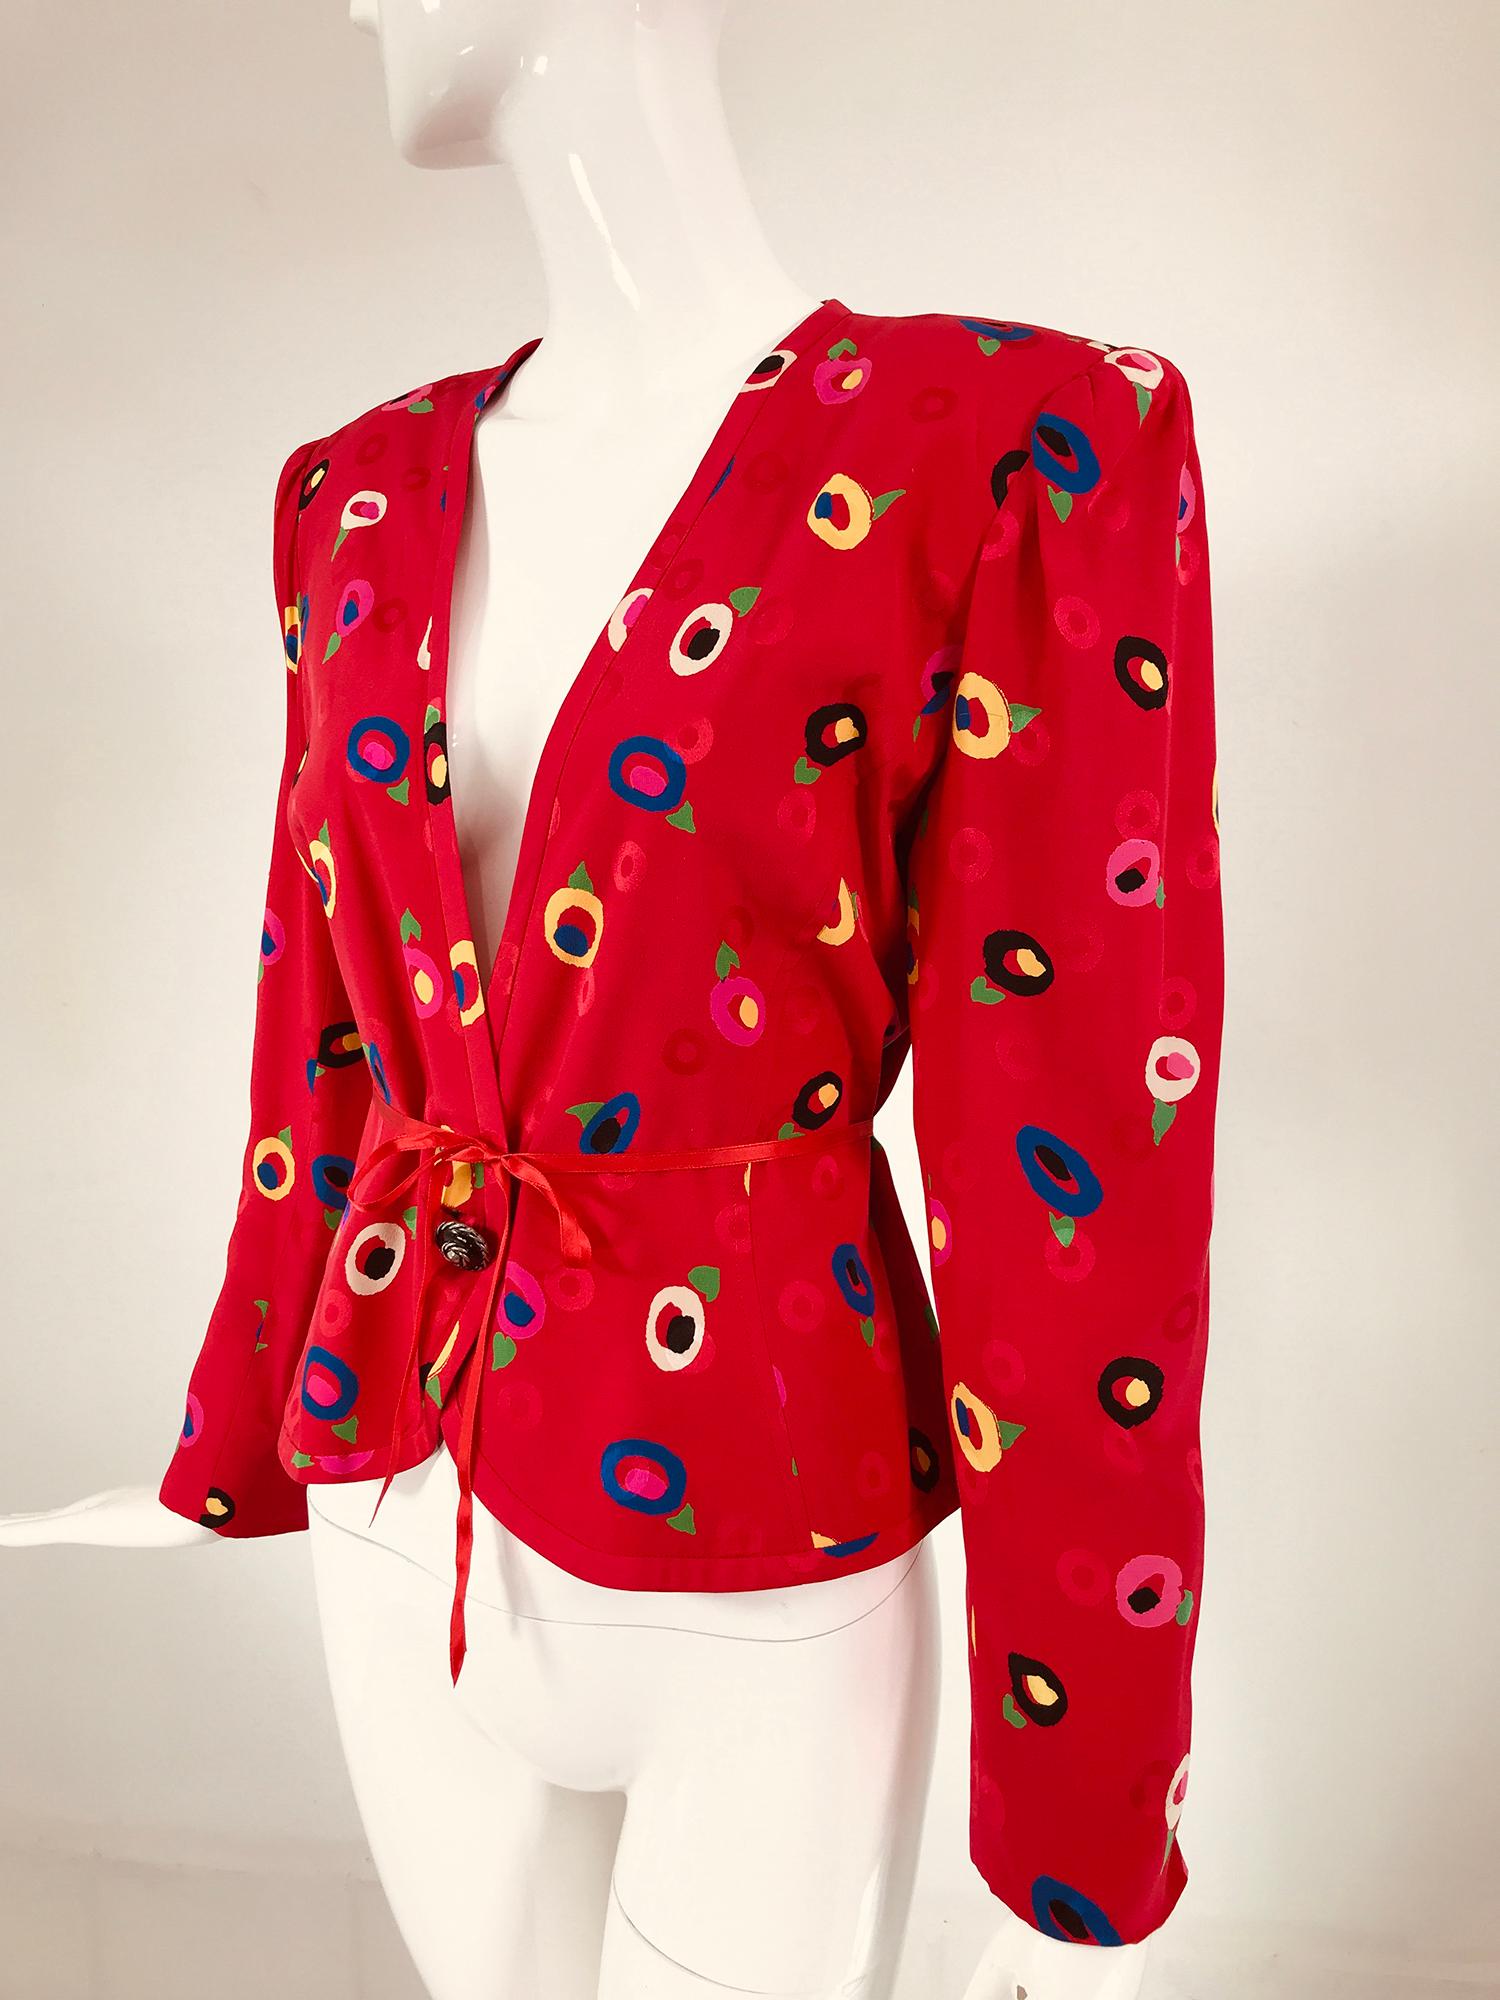 Ungaro red printed silk jacquard V neck button front jacket from the 1980s. Bright abstract flower print in yellow, black, white blue & pink on red, scattered with jacquard circles. Princess seam jacket has a deep V neckline, padded shoulders & a